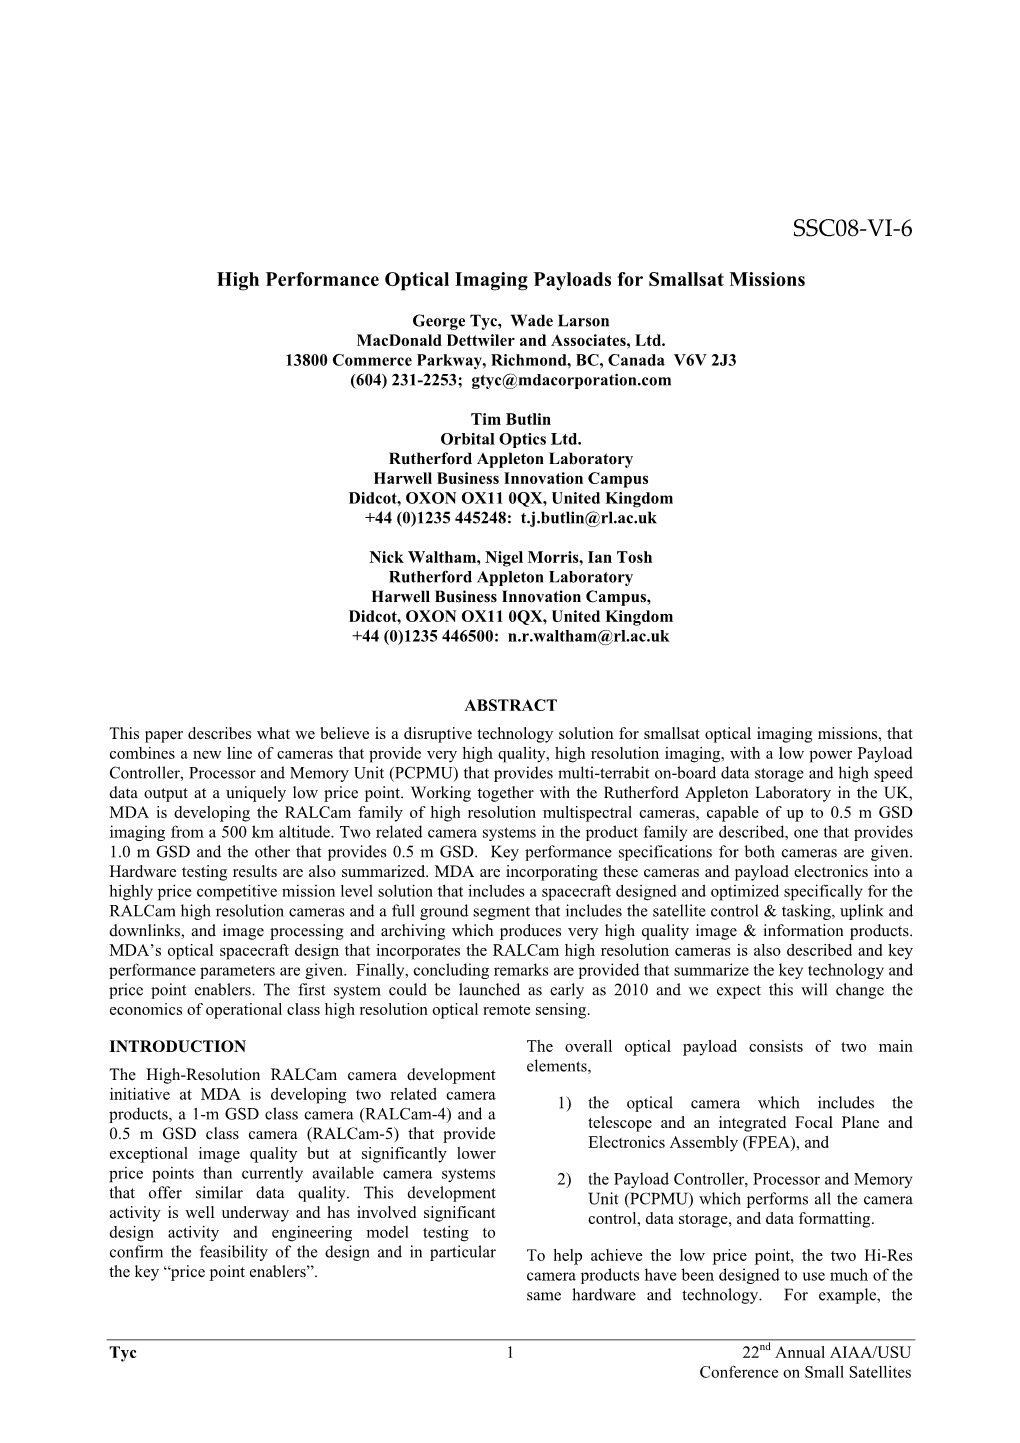 High Performance Optical Imaging Payloads for Smallsat Missions